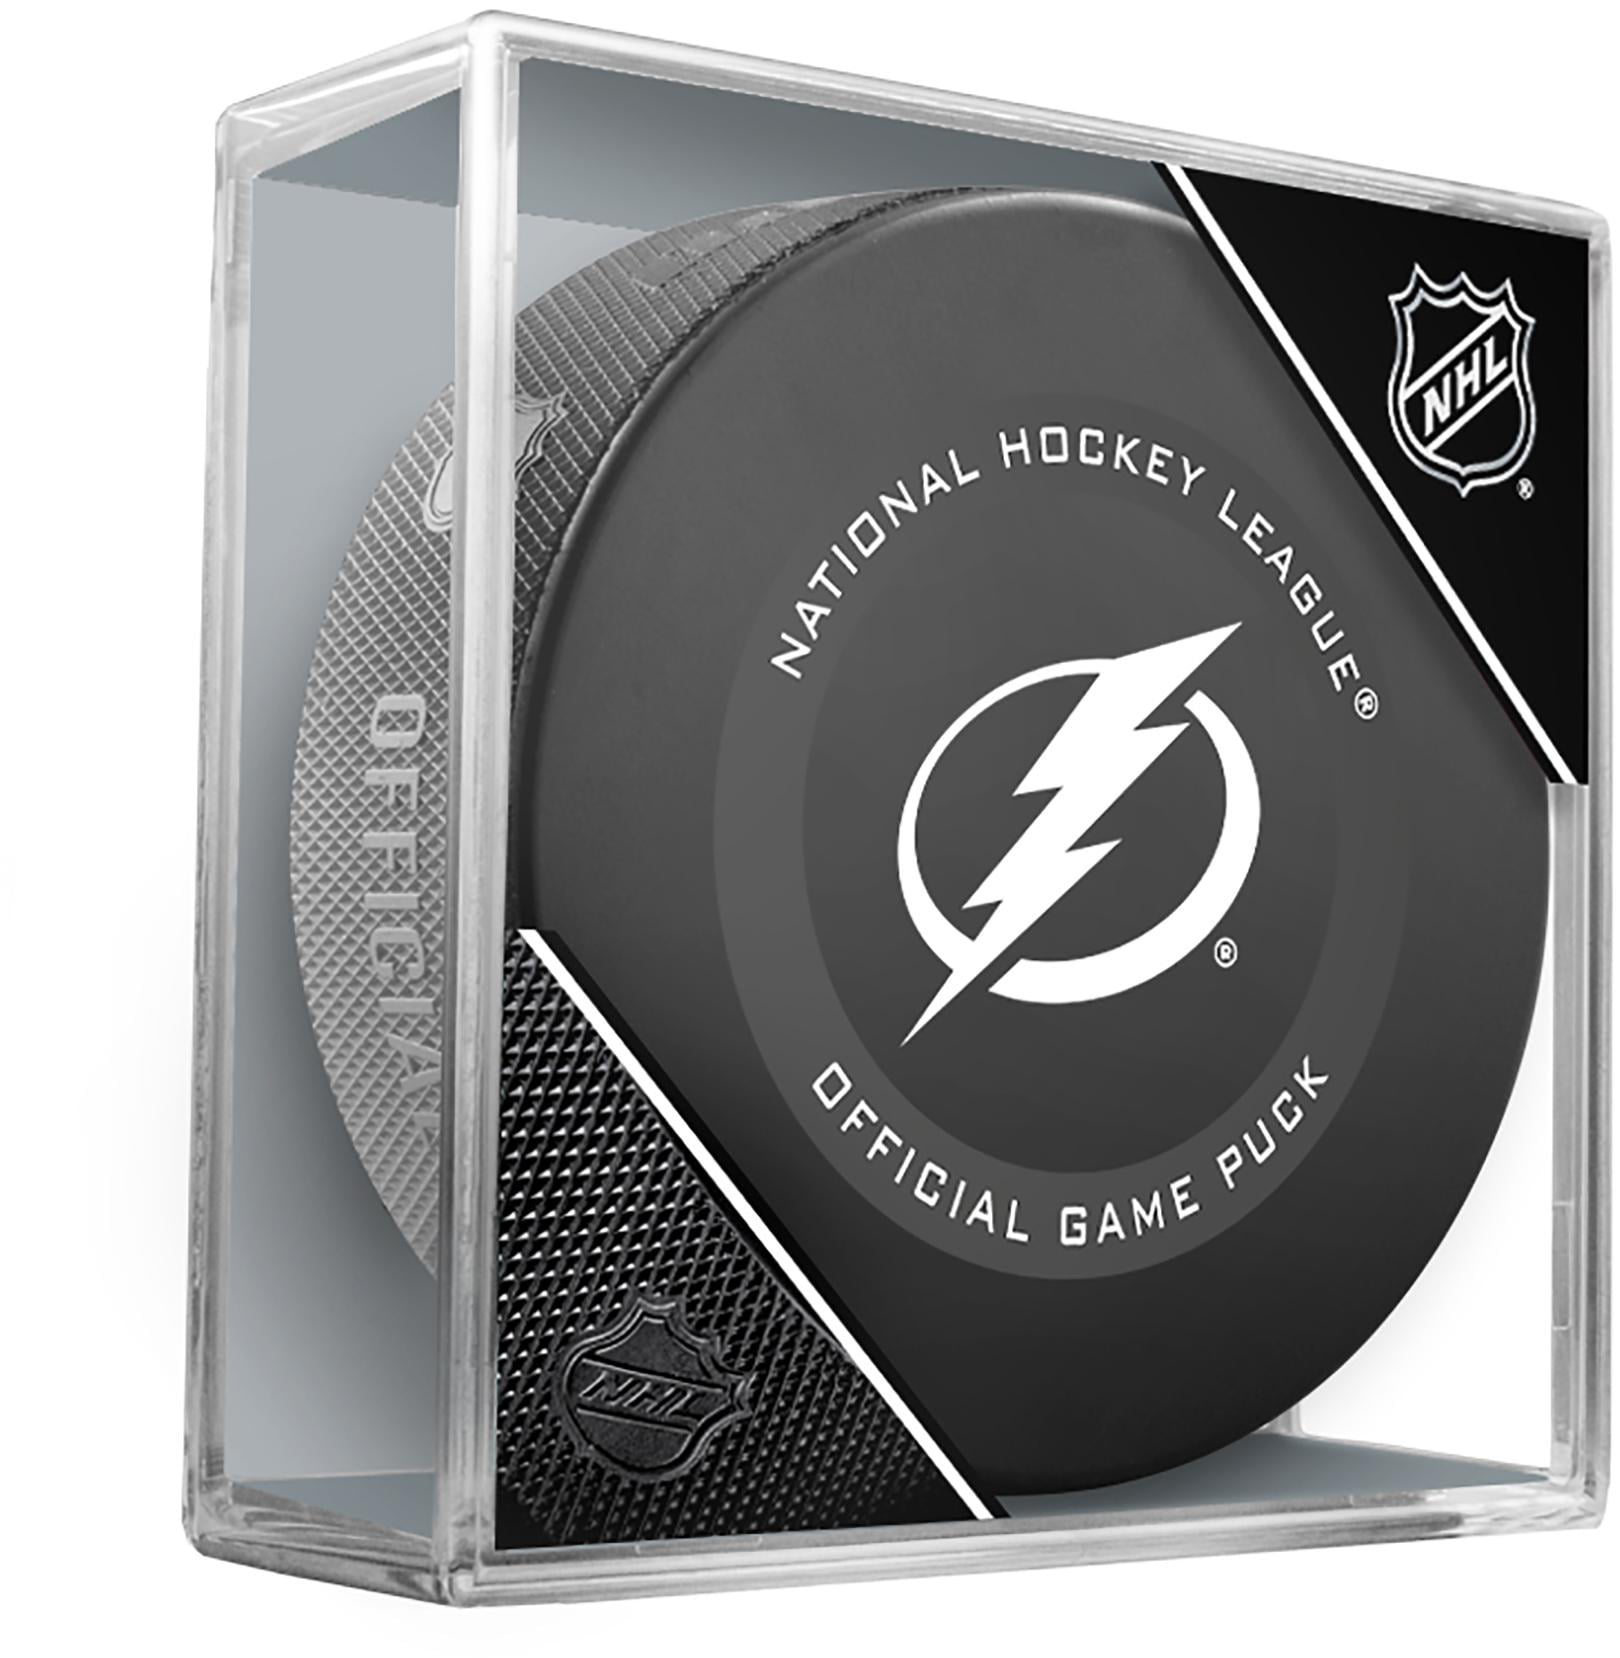 Tampa Bay Lightning Unsigned InGlasCo 2019 Model Official Game Puck